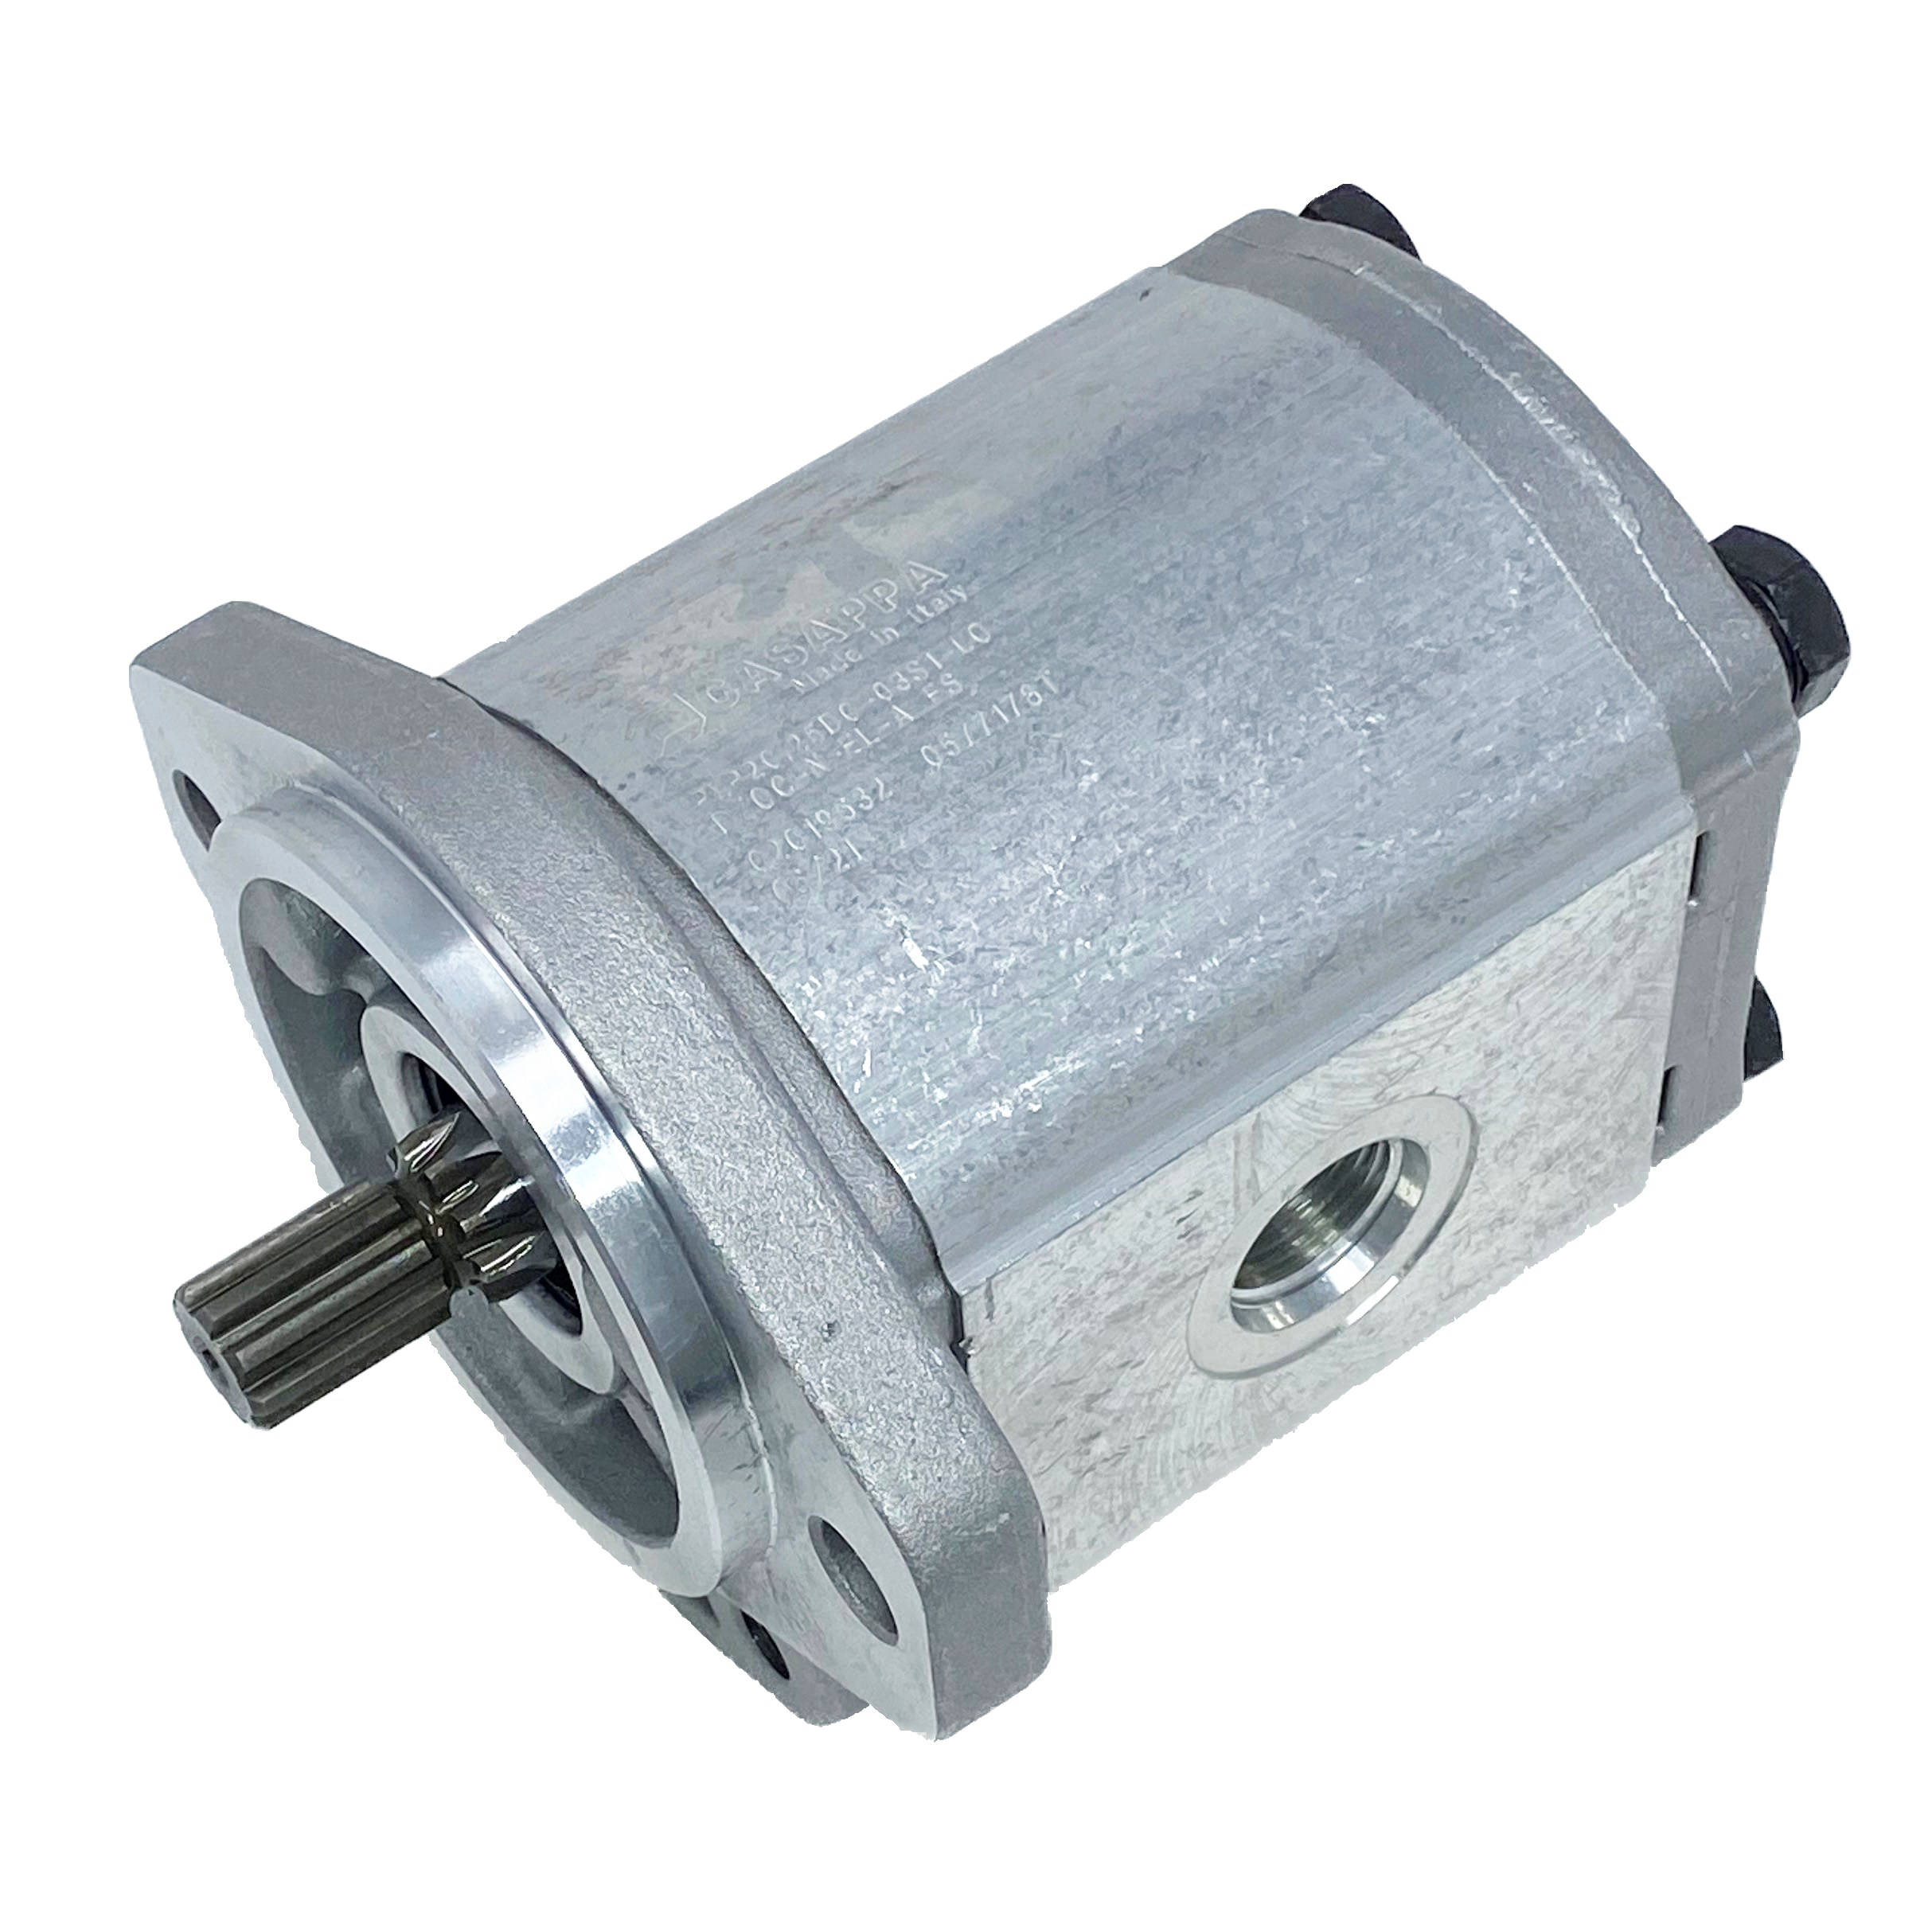 PHP20.27,8S0-03S9-LOG/OC-N-EL : Casappa Polaris Gear Pump, 28.21cc, 2900psi Rated, 2500RPM, CCW, 9T 16/32dp Shaft, SAE A 2-Bolt Flange, 1.25" #20 SAE Inlet, 0.625 (5/8") #10 SAE Outlet, Cast Iron Body, Aluminum Flange